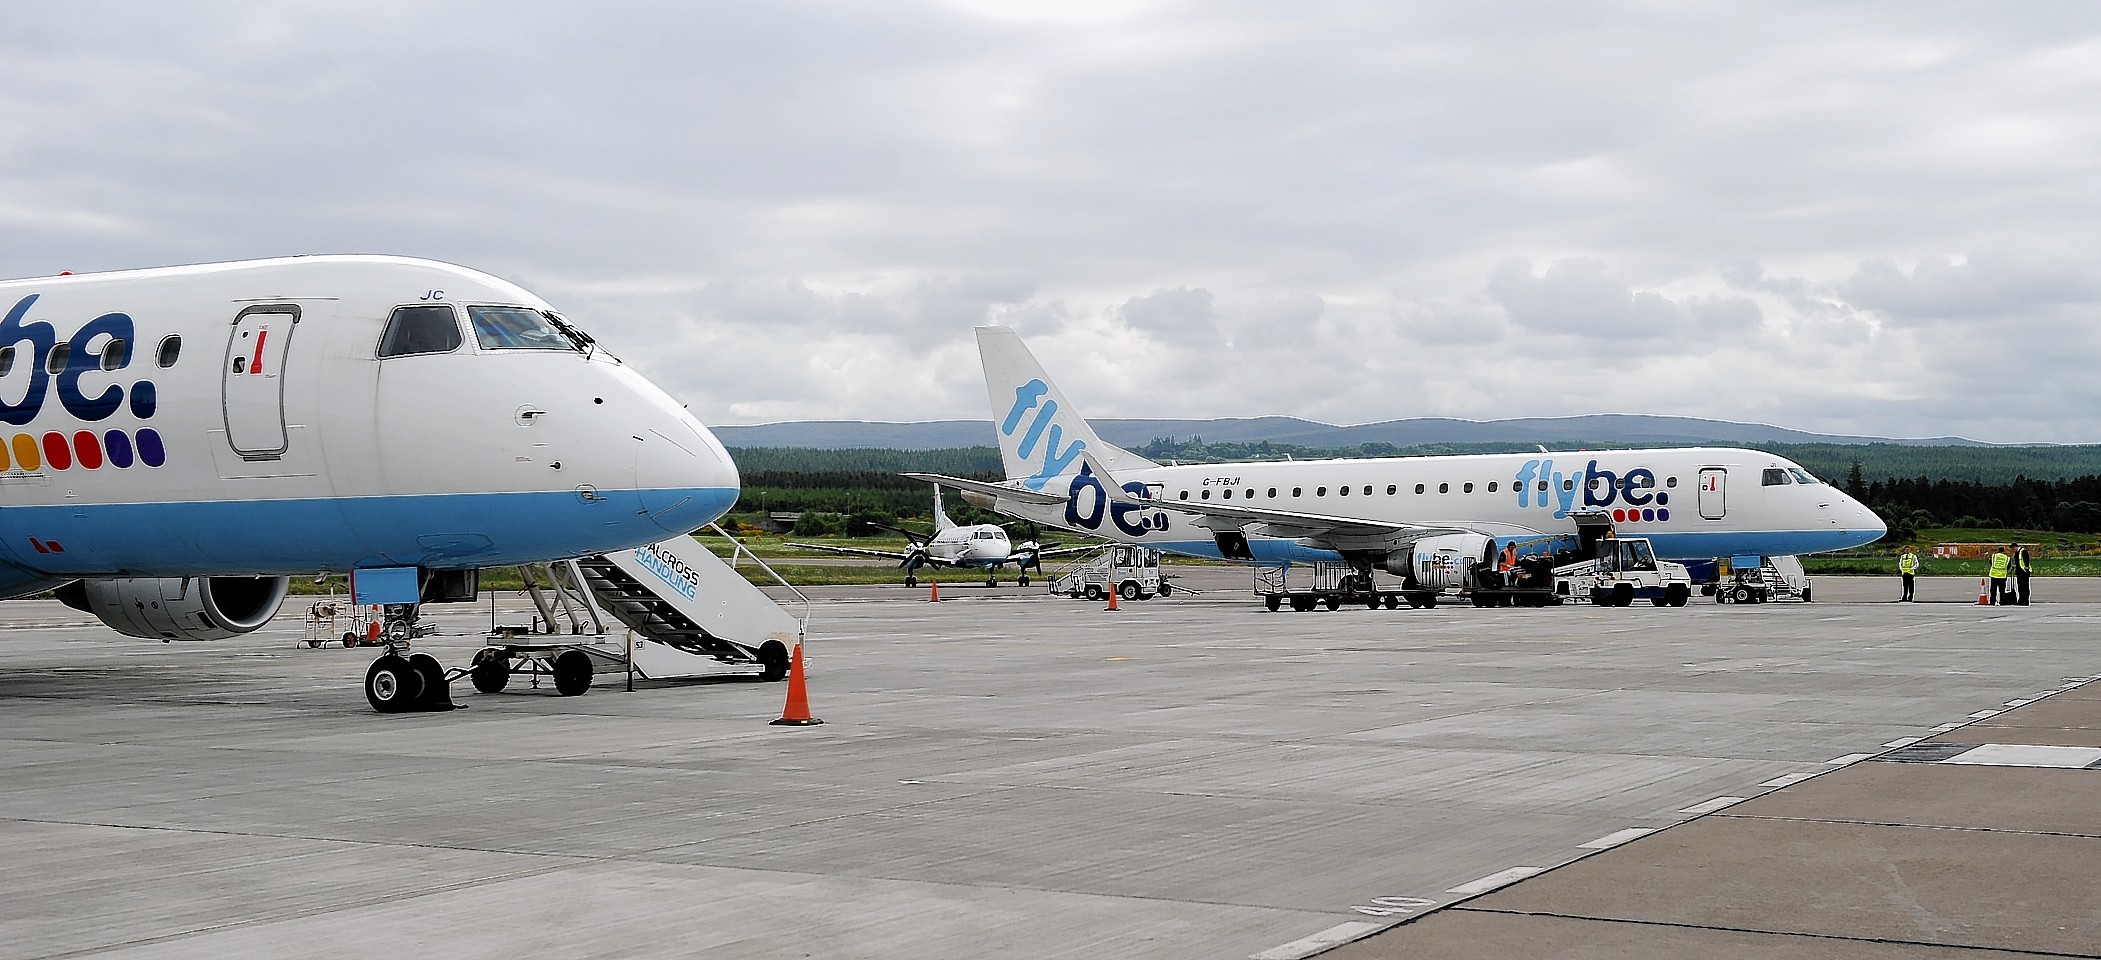 Inverness Airport